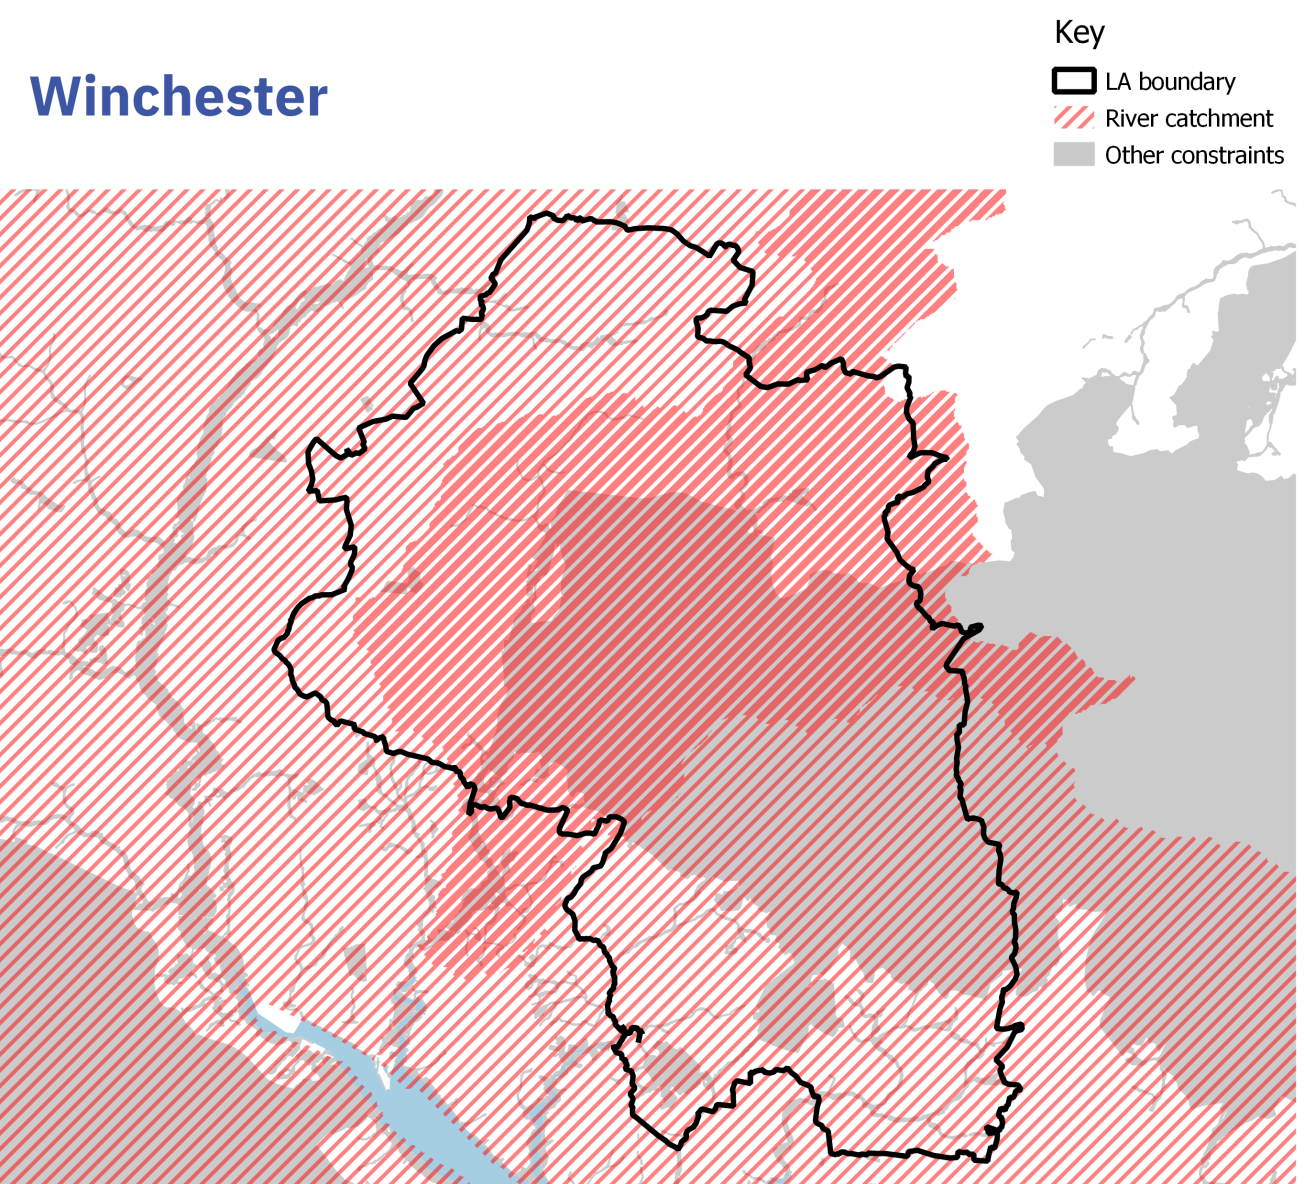 Land cover map: Winchester